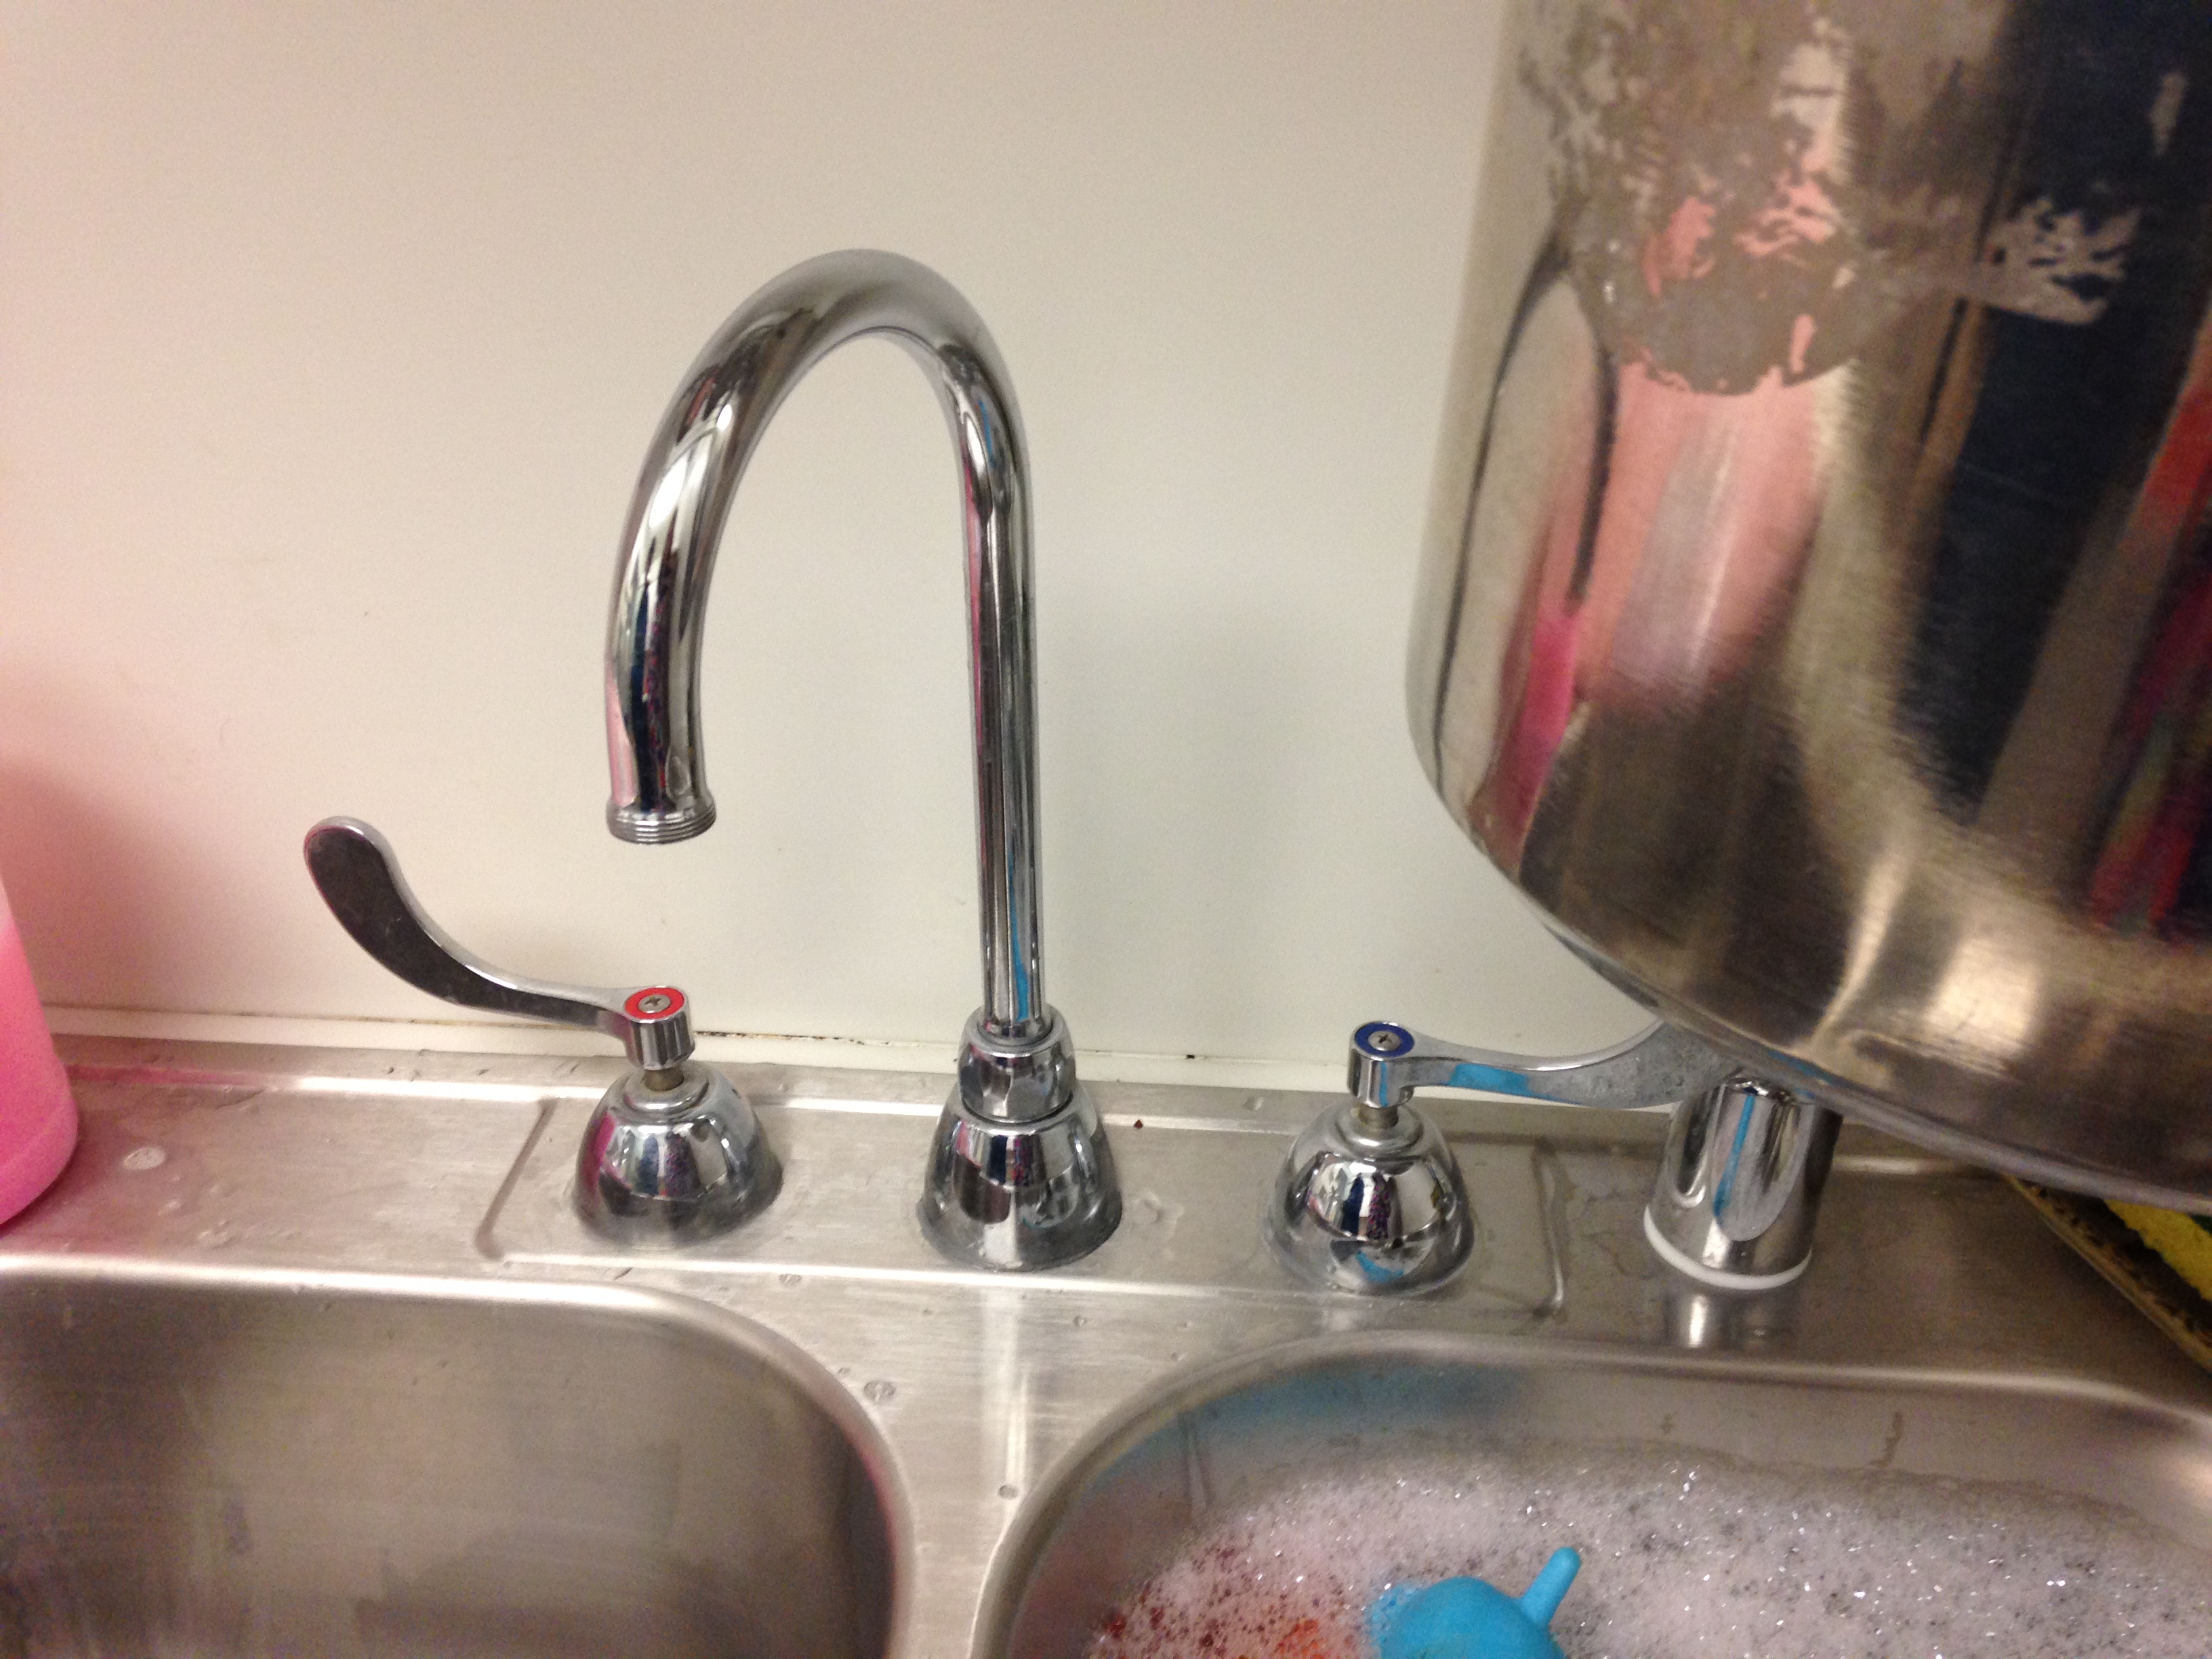 The dog, cat and people areas in the shelter have separate kitchens with sinks and dishwashers.